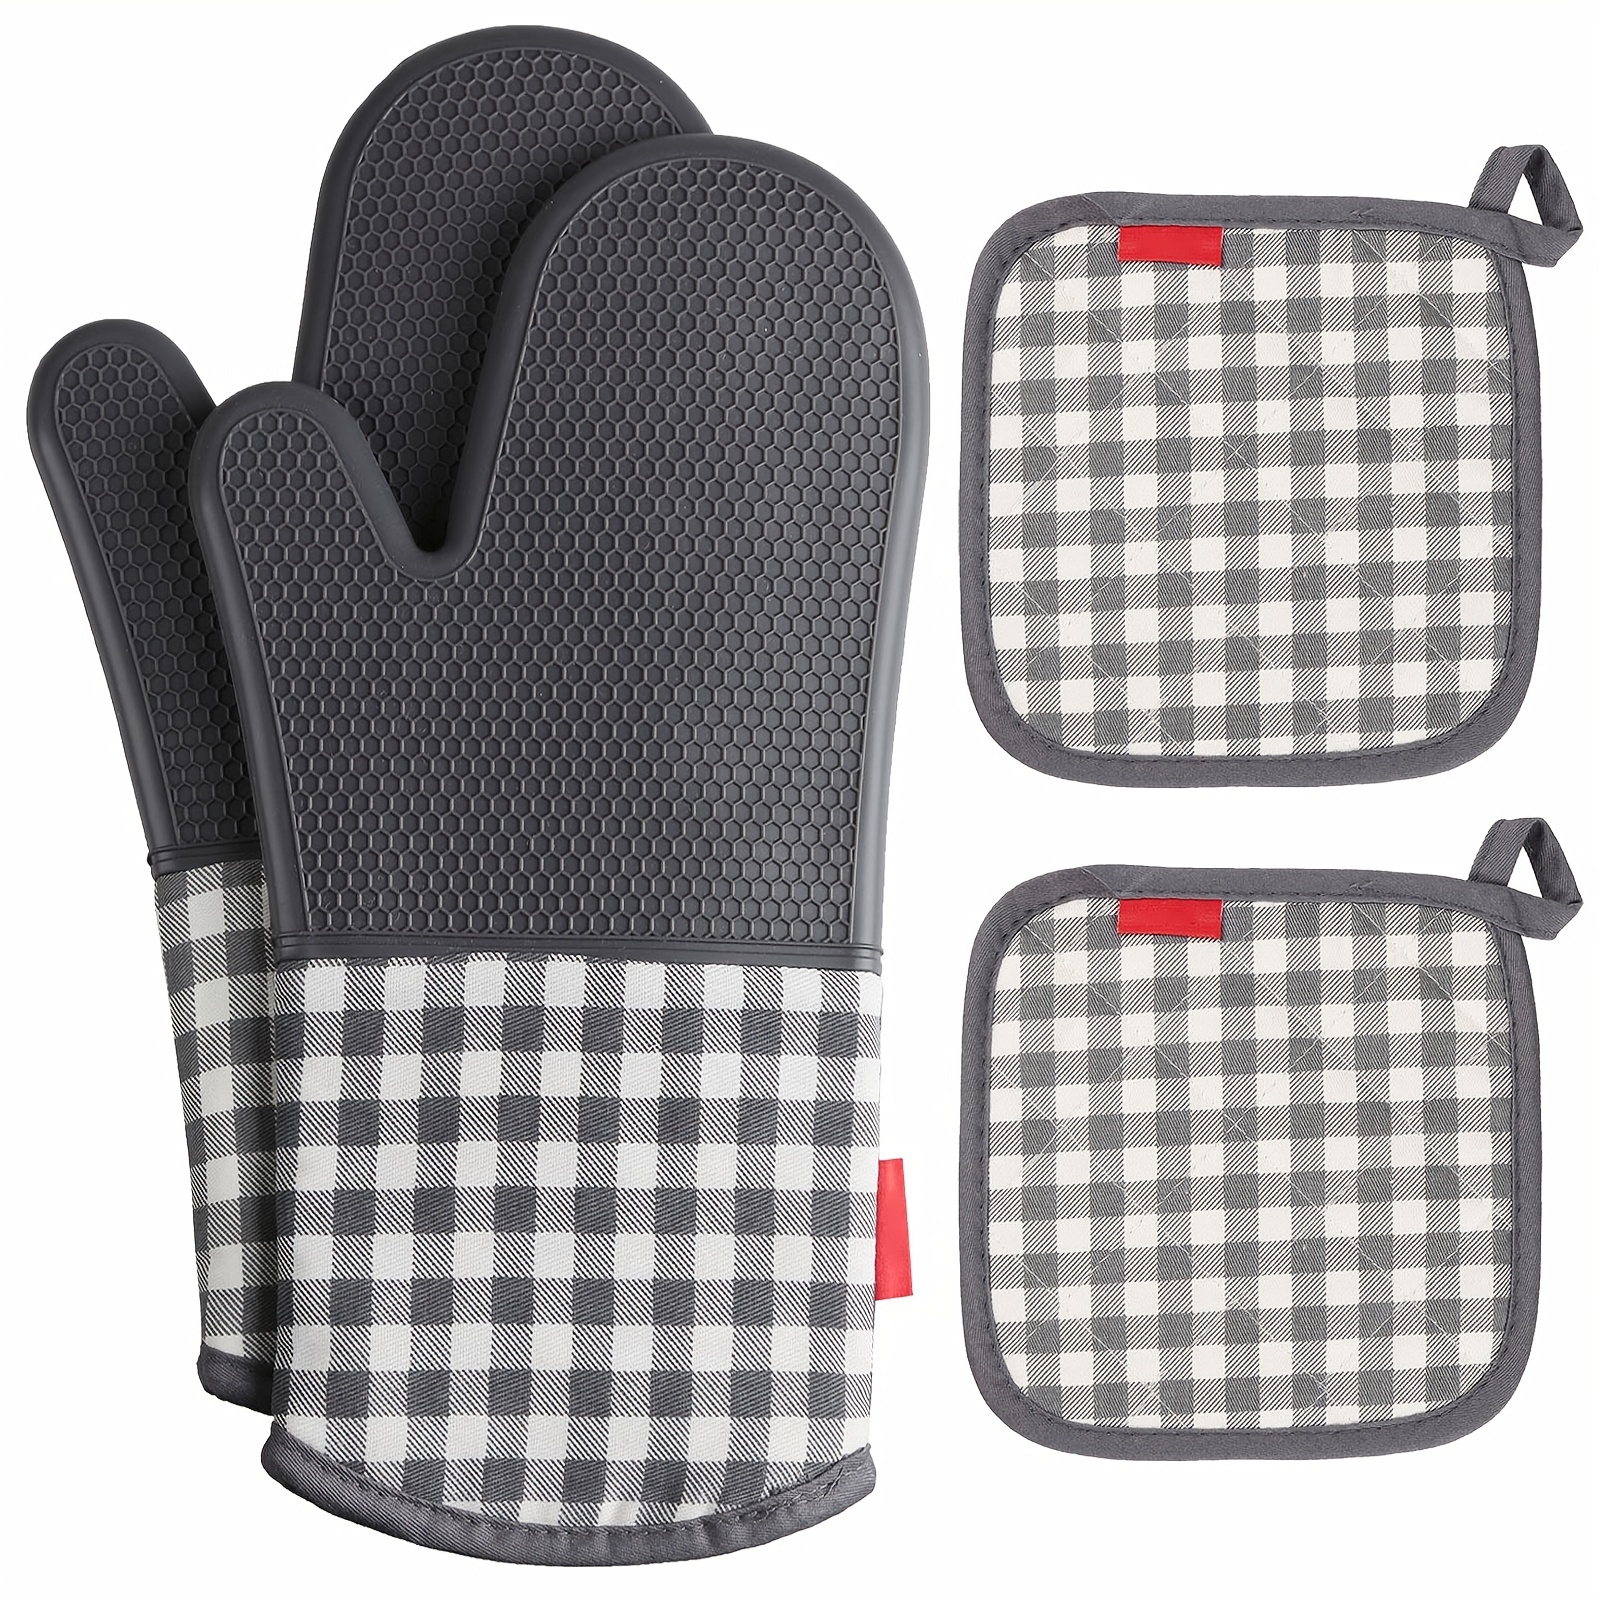 Heat Resistant Silicone Oven Gloves Non-Slip Oven Mitts + 2 Cotton Pot  Holders for Kitchen Cooking Baking Grilling Barbecue